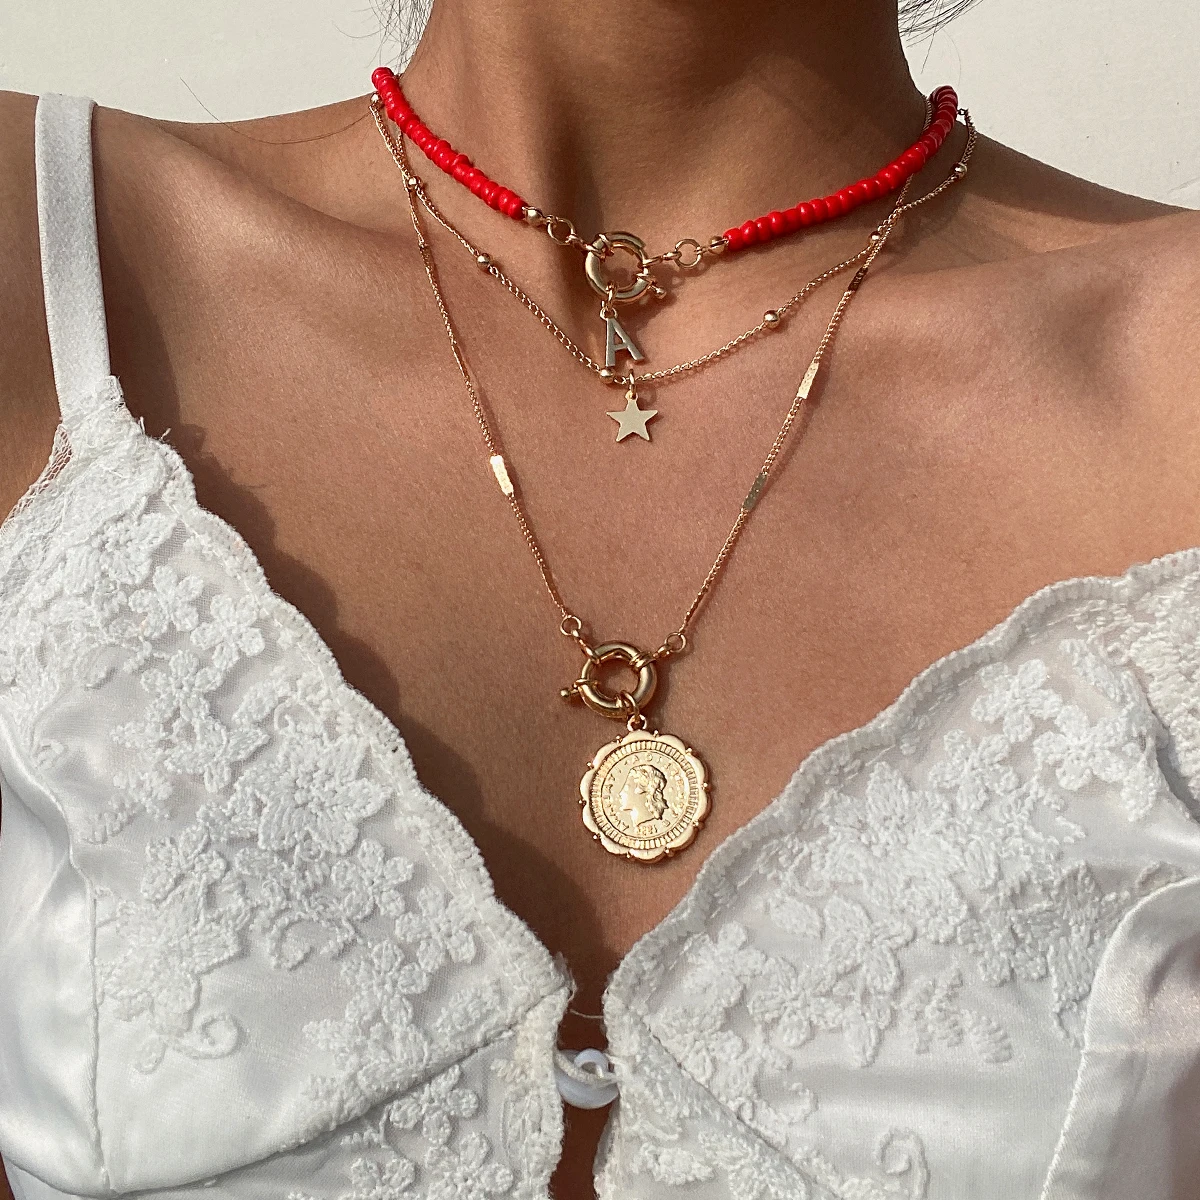 

Lacteo New Vintage Carved Coin Virgin Mary Pendant Necklace for Women Fashion Multi Layer Clavicle Chain Choker Necklace Jewelry